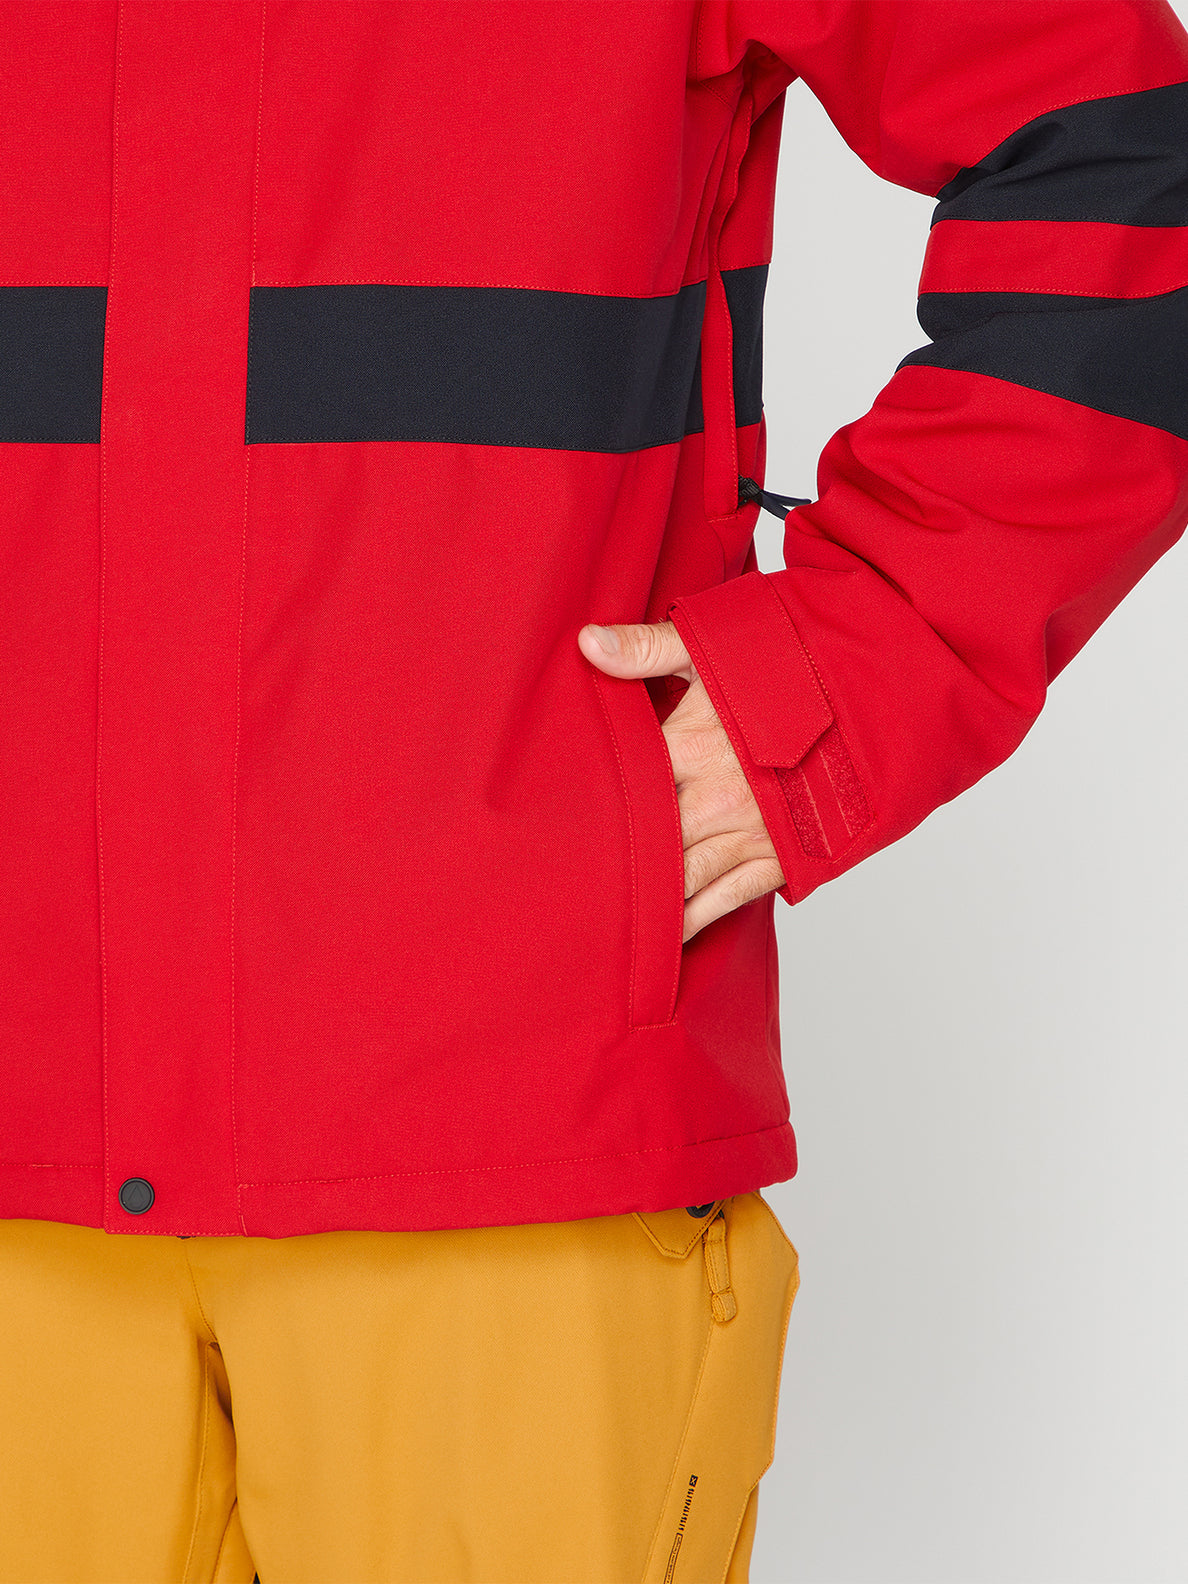 Mens Jp Insulated Jacket - Red